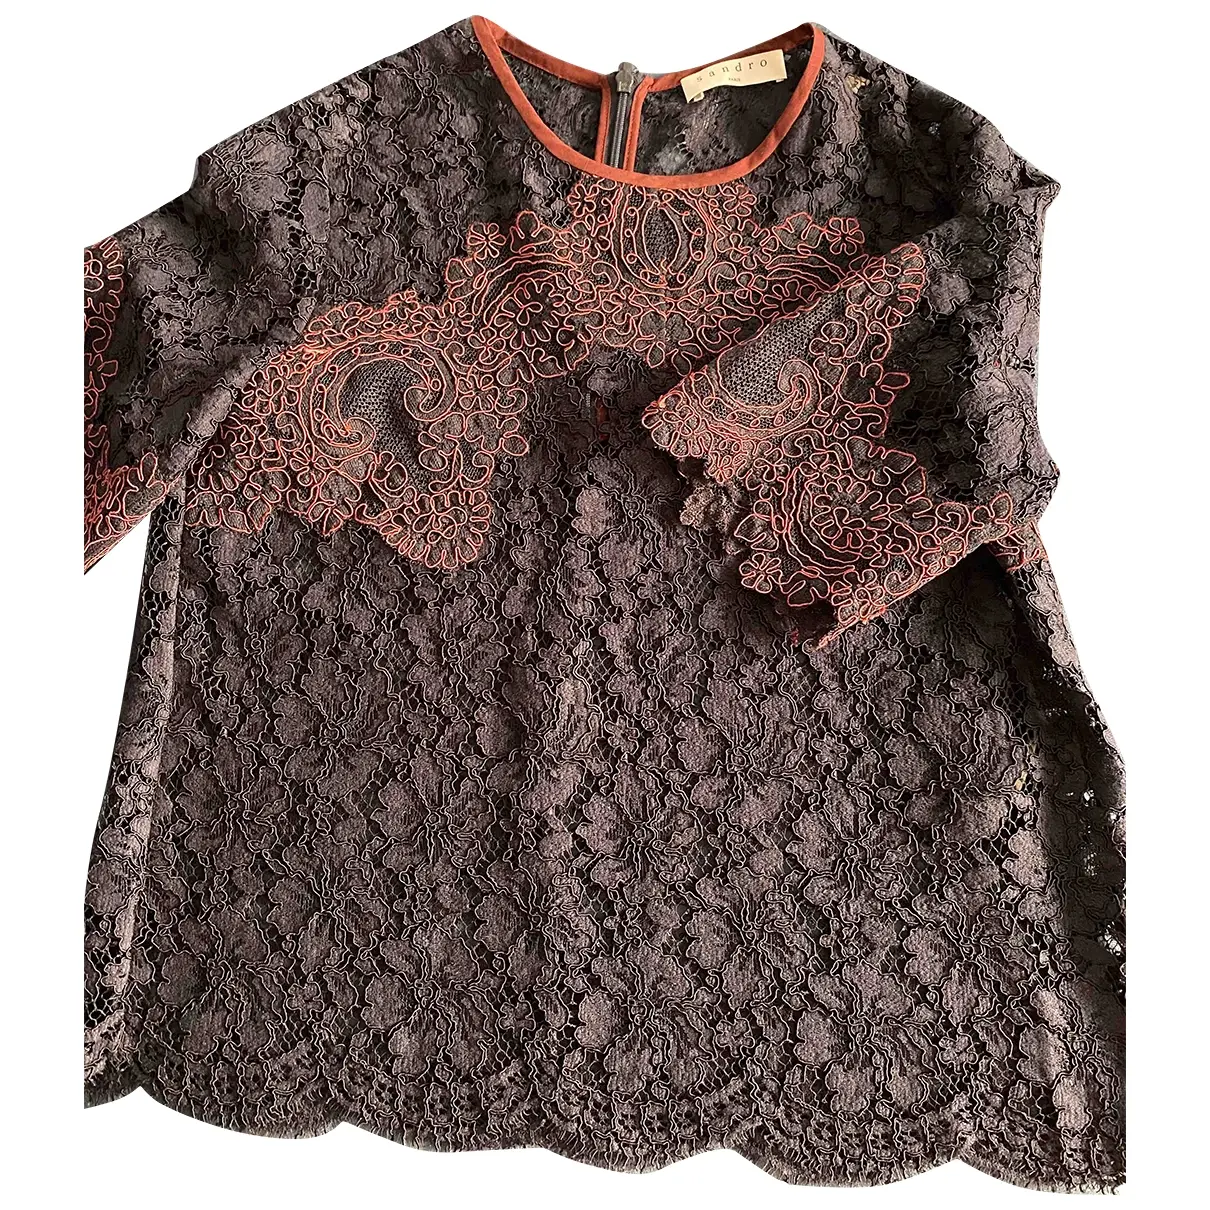 Lace top Sandro